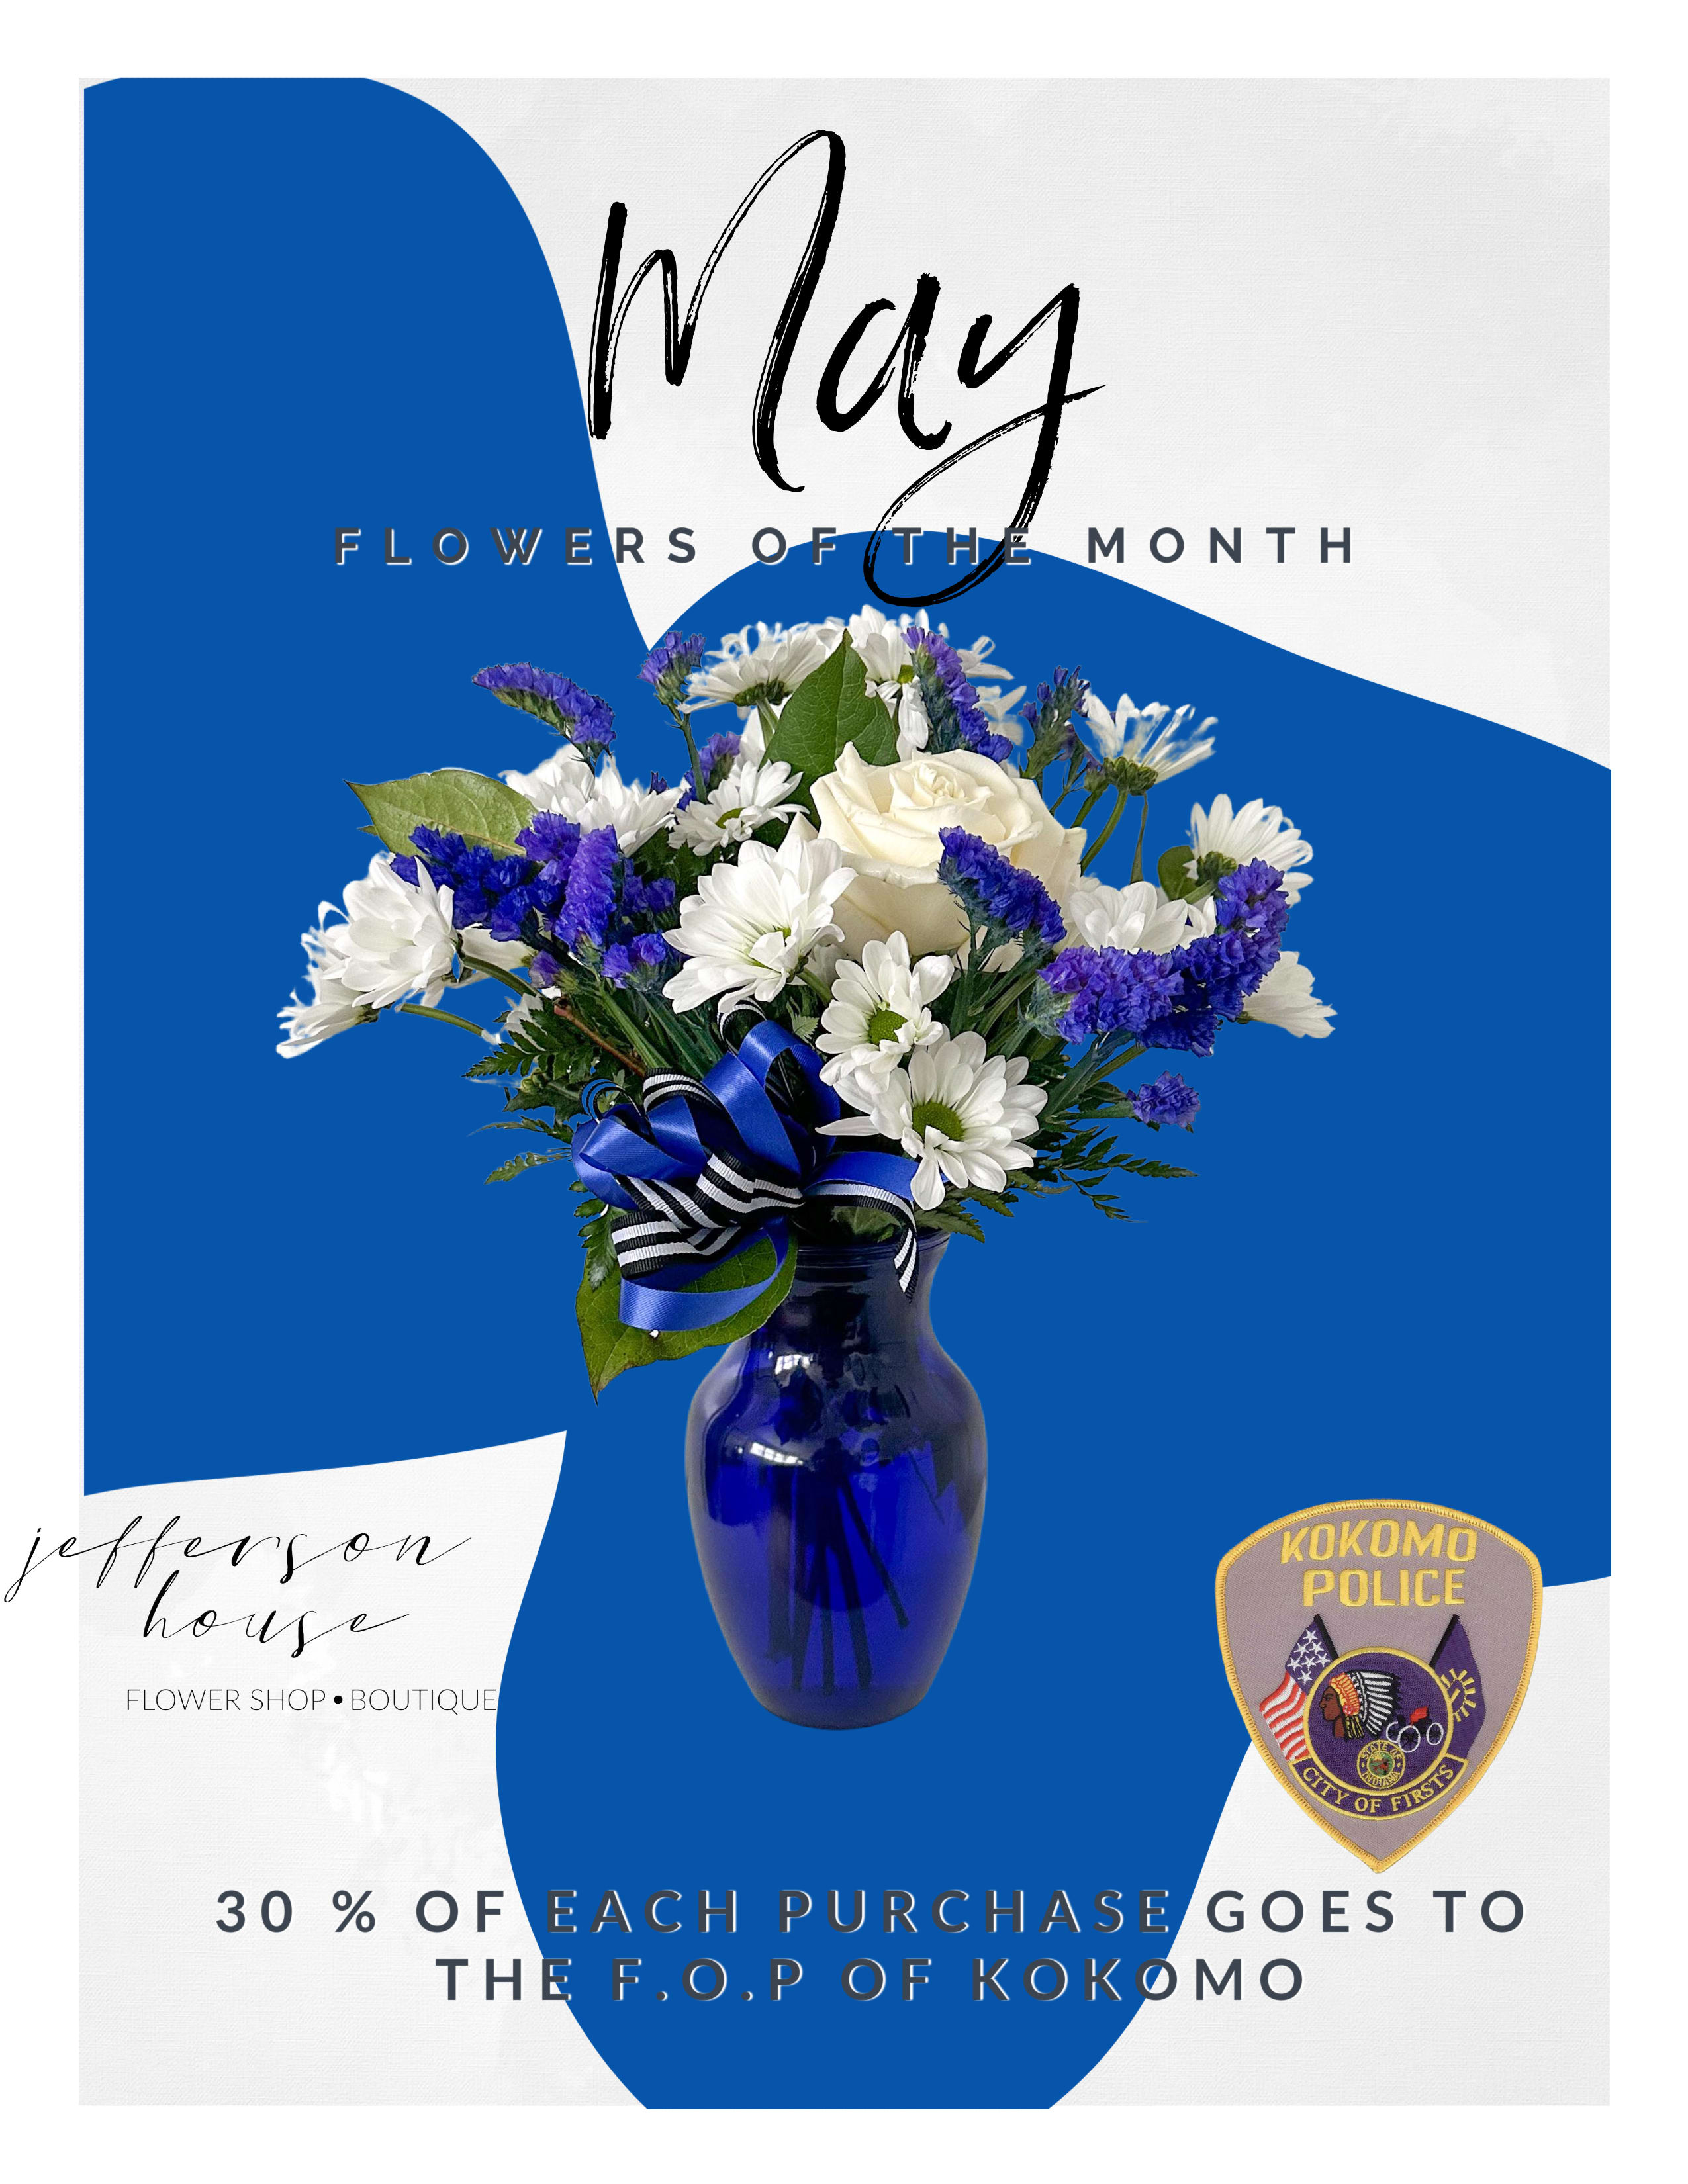 Guns + Roses - This is our May bouquet of the month! 30% of each purchase will go to the F.O.P. of Kokomo to use throughout the year on various community projects! We are so excited to support the men in blue of Kokomo as a small thanks for protecting and serving our community.   This blue vase contains white daisies, white rose, and blue statice. Complete with a thin blue line bow. 